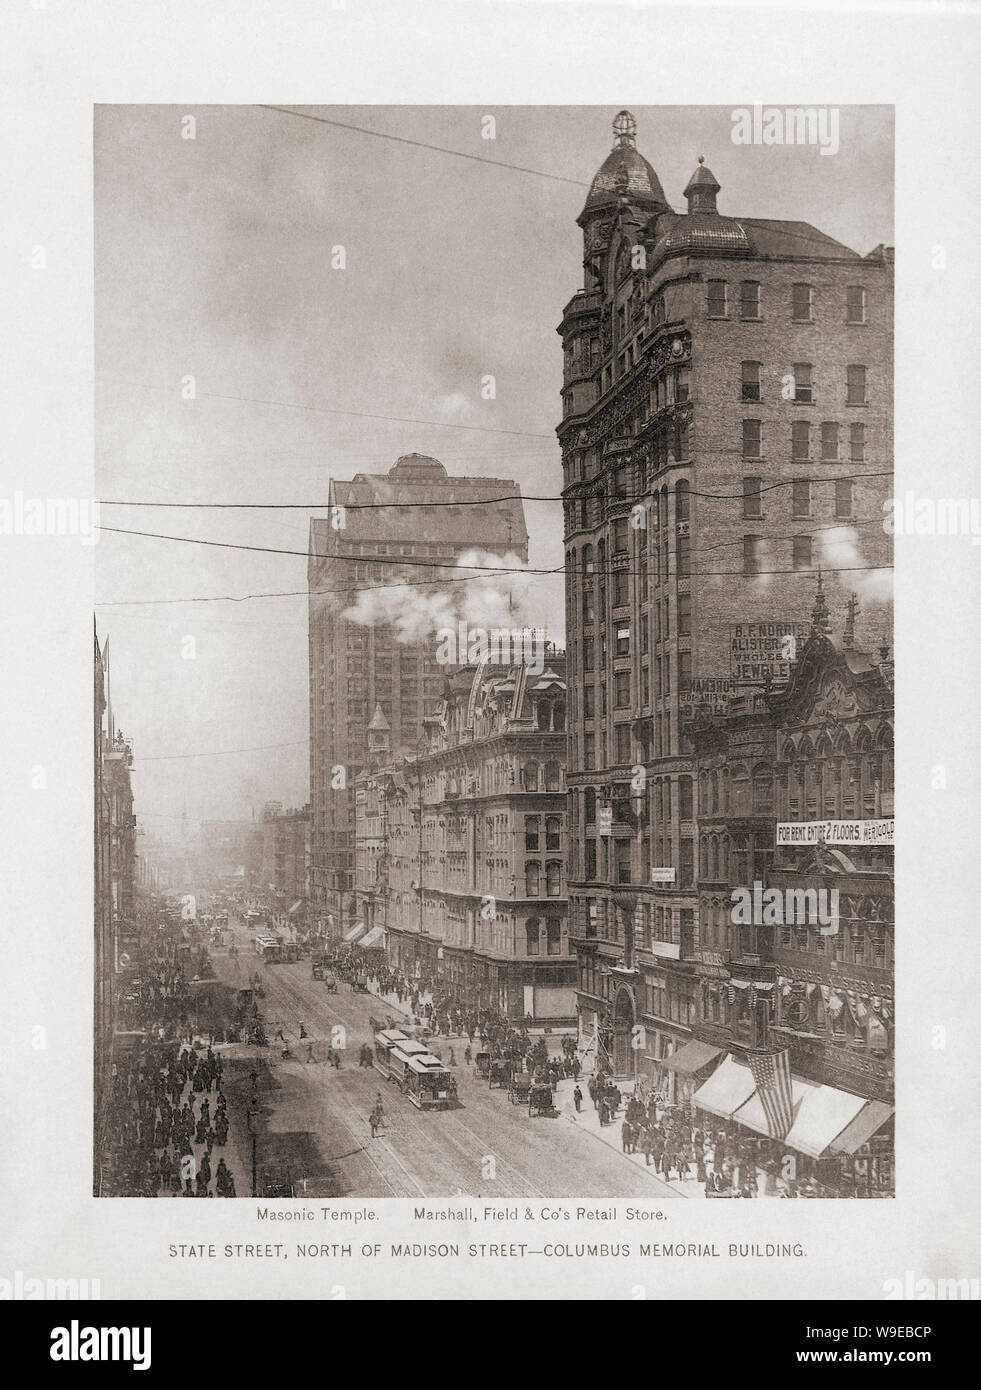 State Street, North of Madison Street with Columbus Memorial Building, Chicago, Illinois, USA.  From the book The United States of America - One Hundred Albertype Illustrations From Recent Negatives of the Most Noted Scenes of Our Country, published 1893. Stock Photo